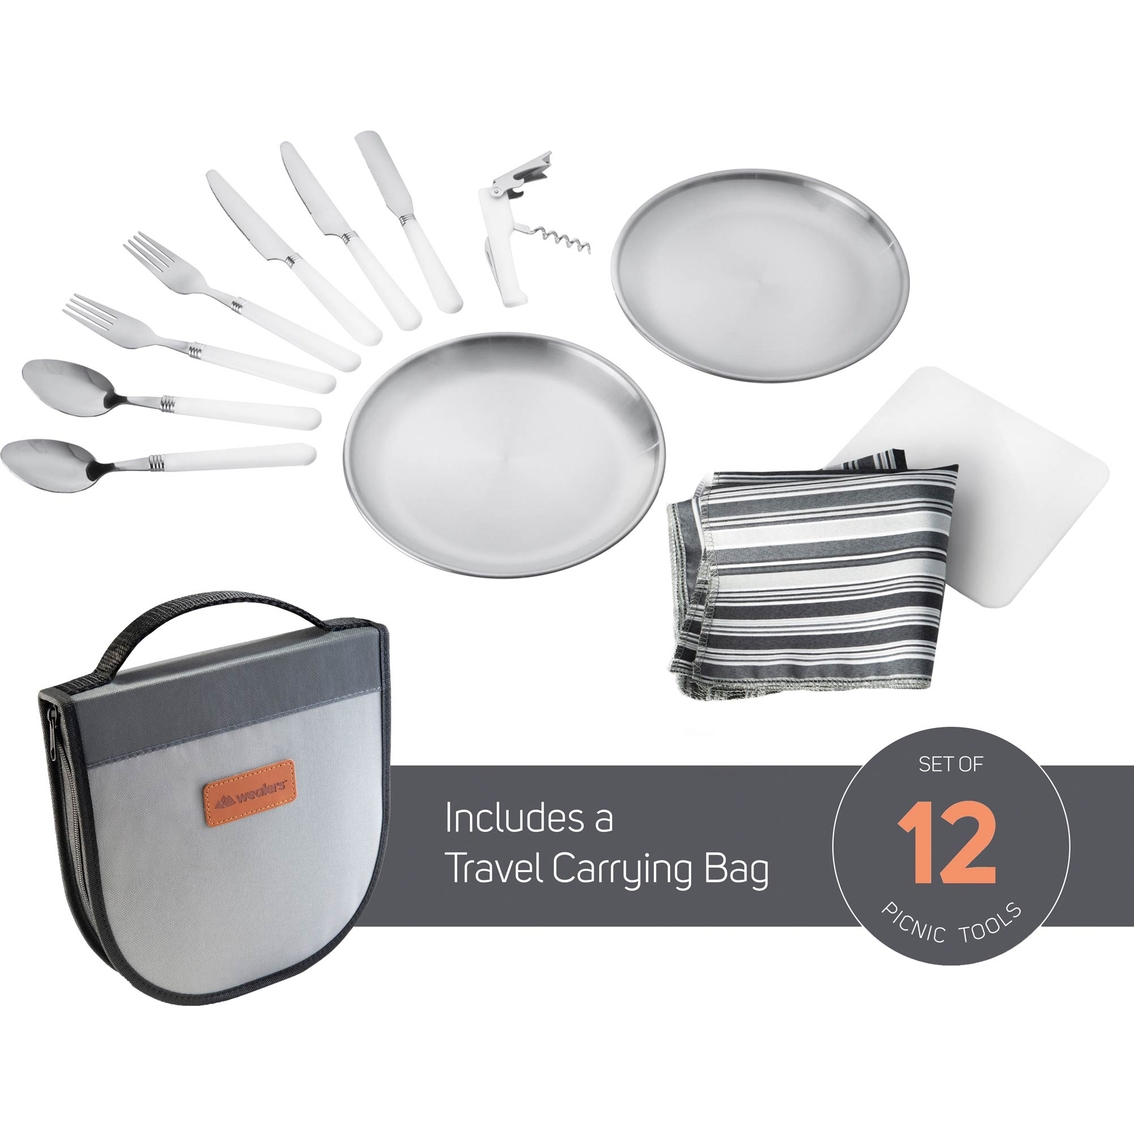 Wealers Camp and Kitchen Mess Kit 12 pc. with Bag - Image 2 of 6